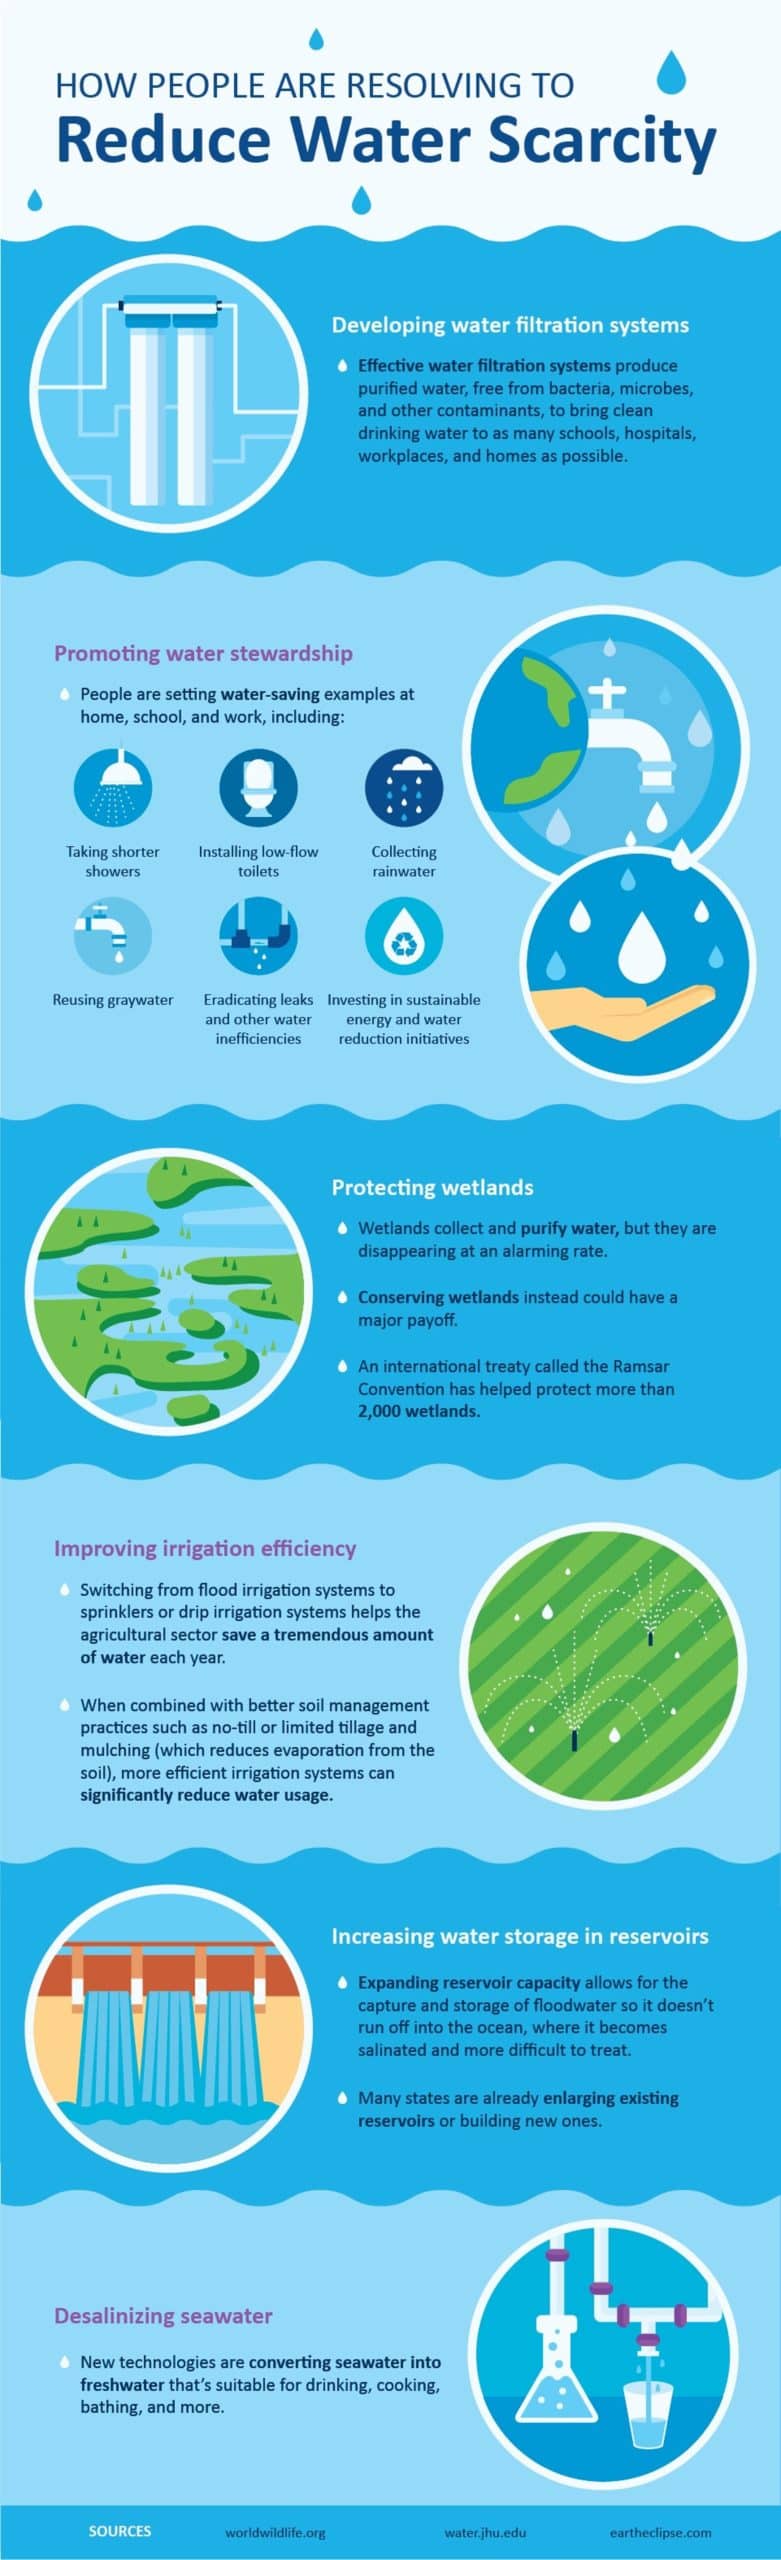 infographic-how-people-reduce-water-scarcity